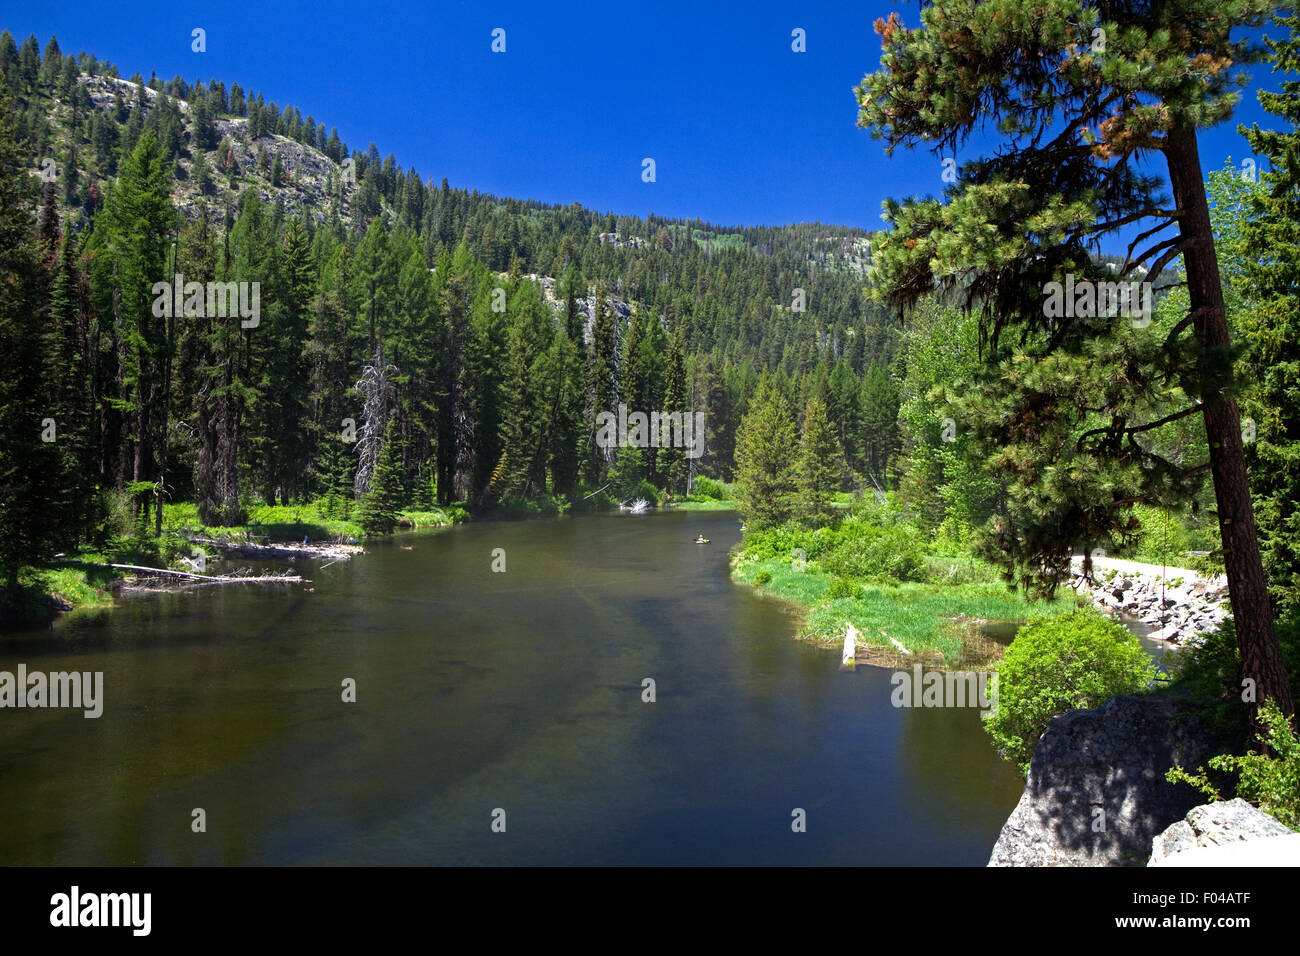 Upper Payette River inlet flowing into Payette Lake, McCall, Idaho, USA. Stock Photo